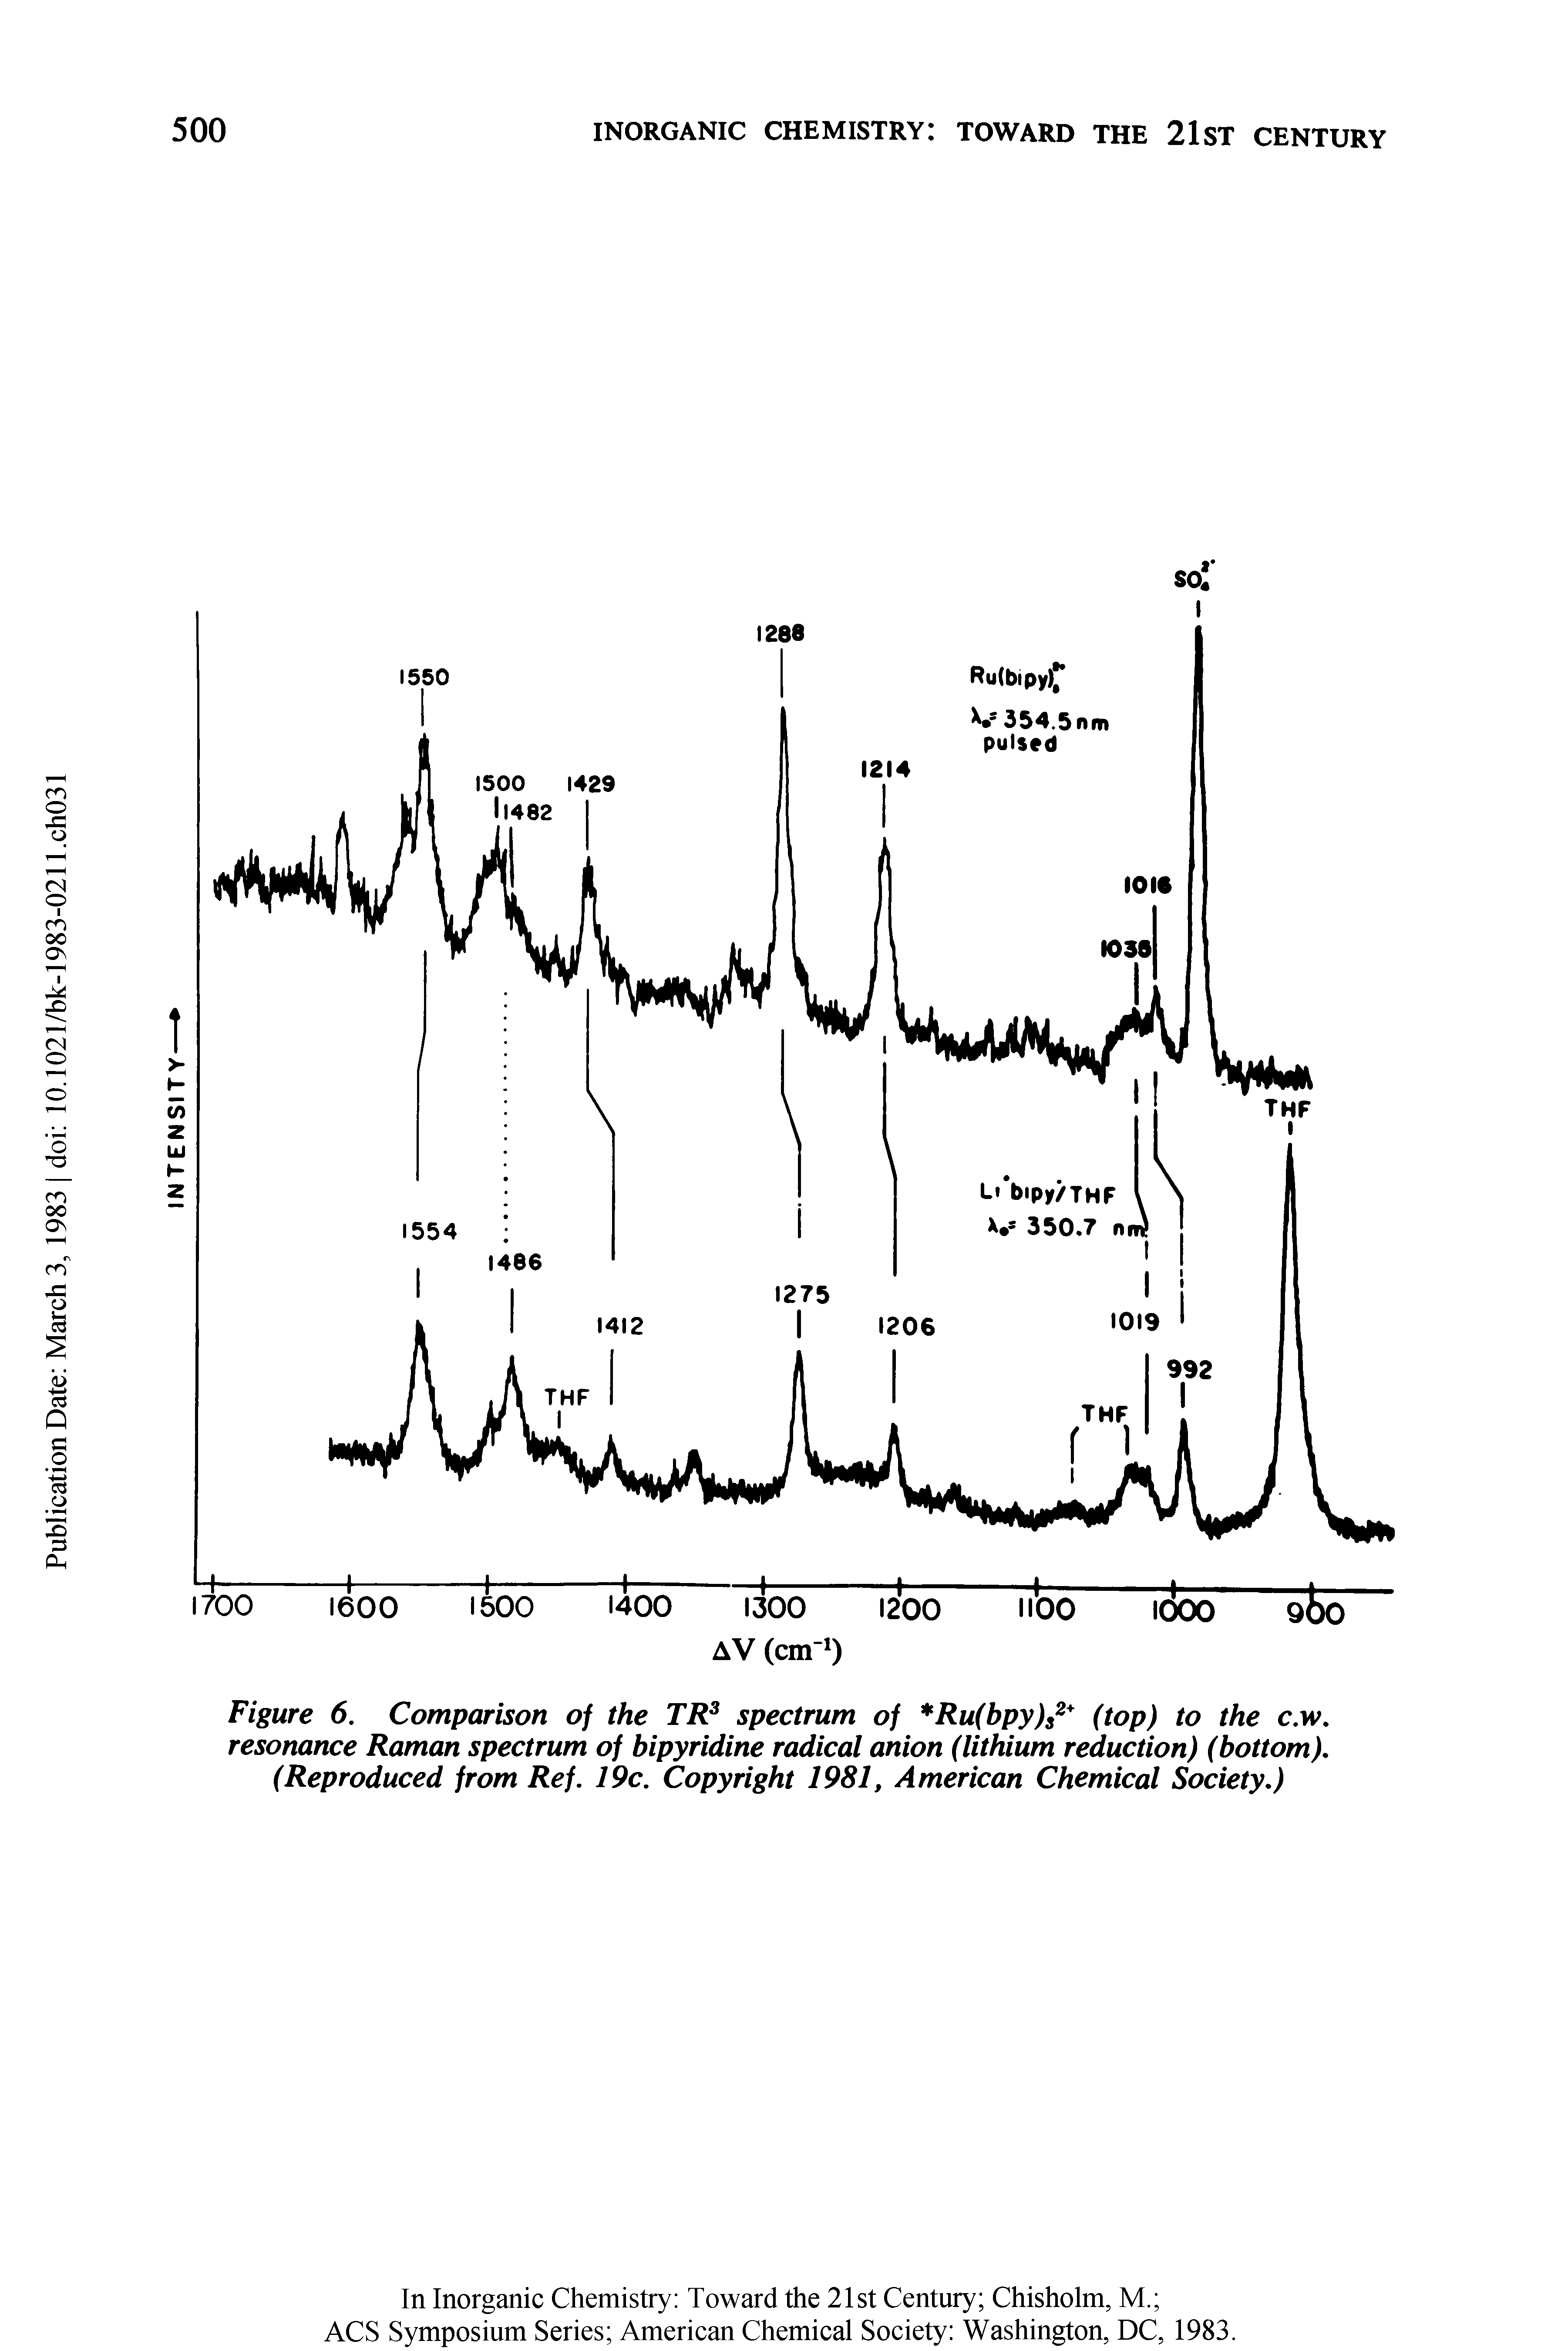 Figure 6. Comparison of the TR3 spectrum of Ru(bpy)s2 (top) to the c.w. resonance Raman spectrum of bipyridine radical anion (lithium reduction) (bottom), (Reproduced from Ref. 19c. Copyright 1981, American Chemical Society.)...